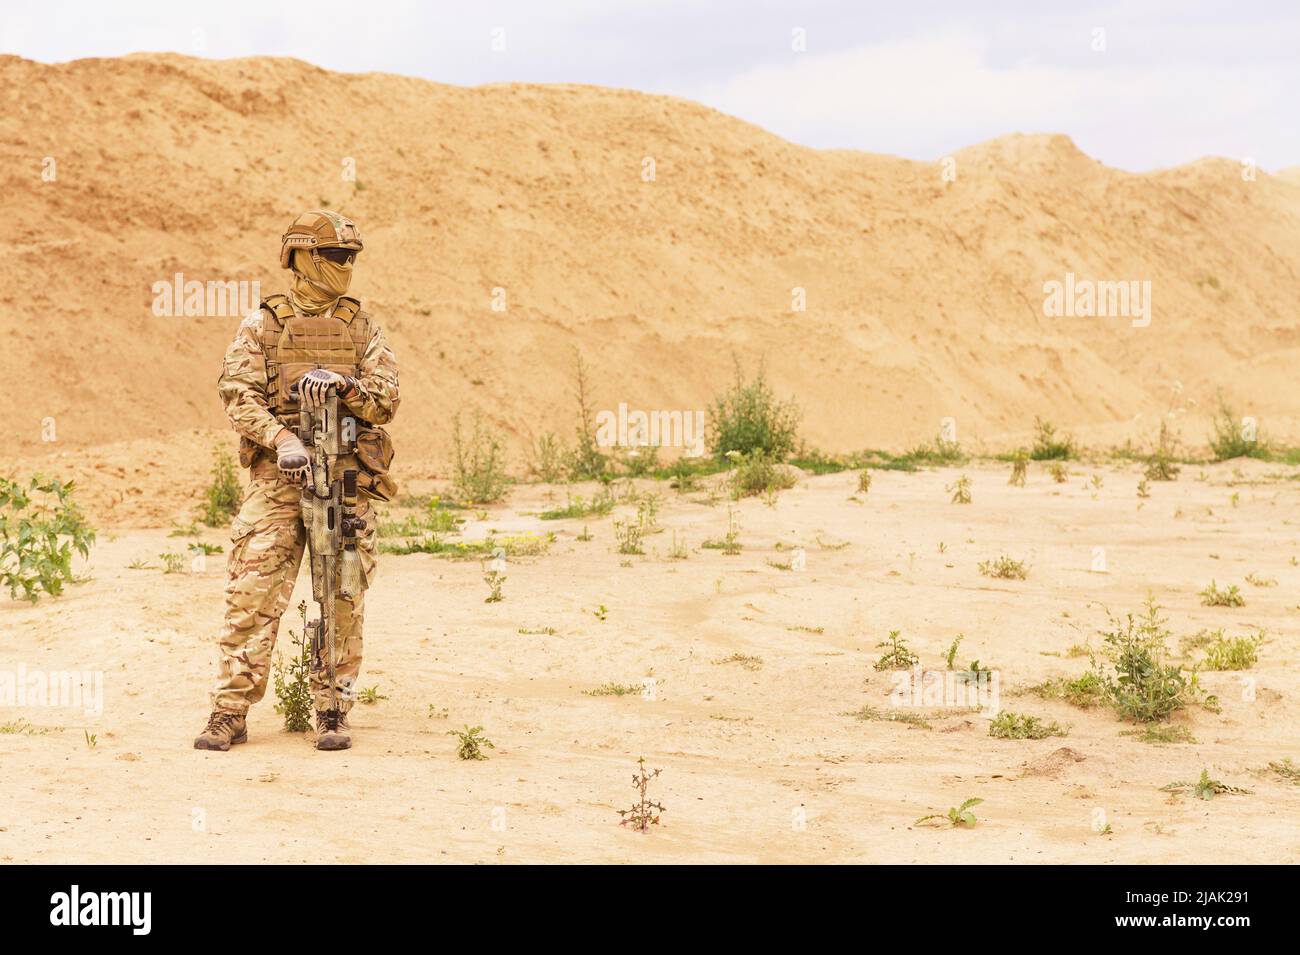 Equipped and armed standing in the desert. Stock Photo